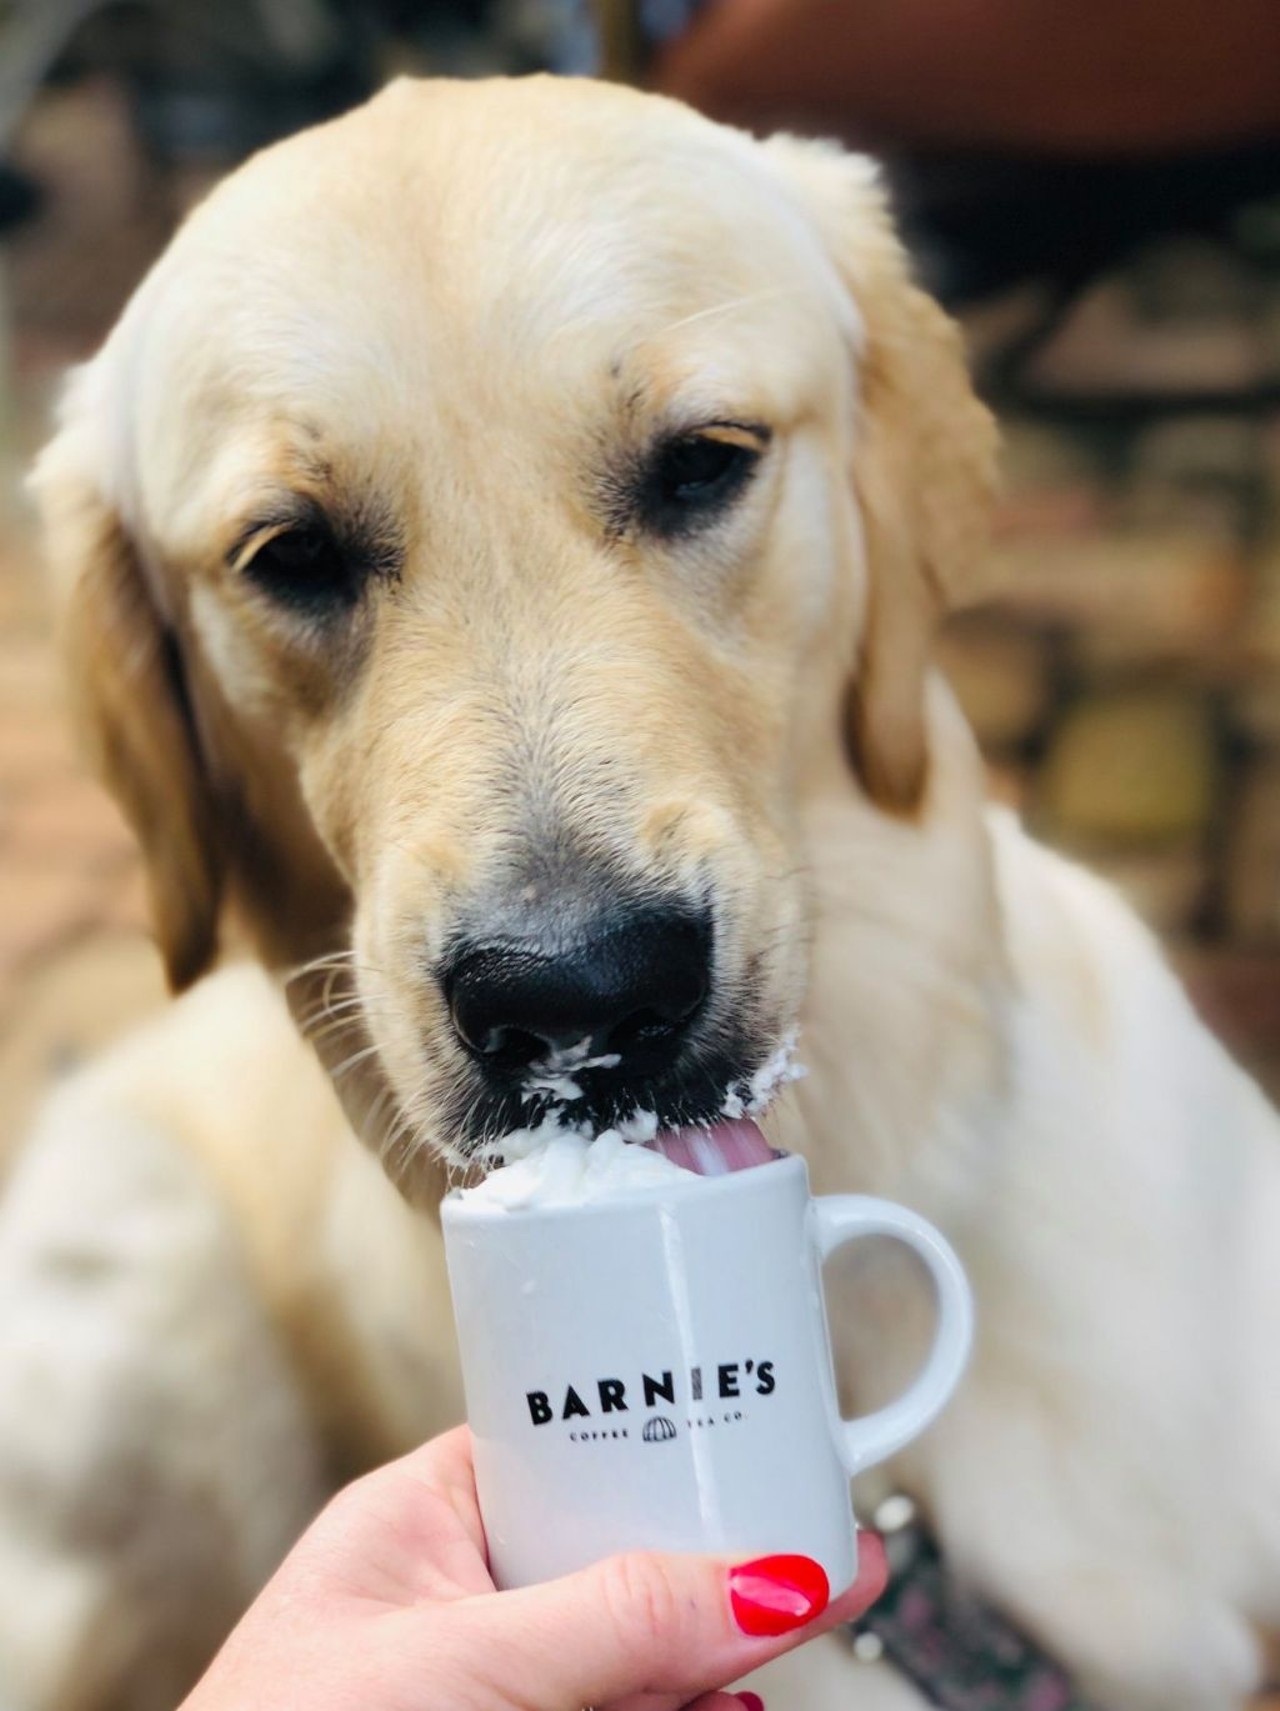 Bernie&#146;s Coffee and Tea Co. 
118 S Park Ave, Winter Park, FL 32789, (407) 629-0042
They roast their own coffee, create specialty drinks and offer delicious puppaccinos for all the doggies out there. They have an outdoor area where you and your pet can have a great time.
Photo via Bernie&#146;s Coffee and Tea Co./Facebook